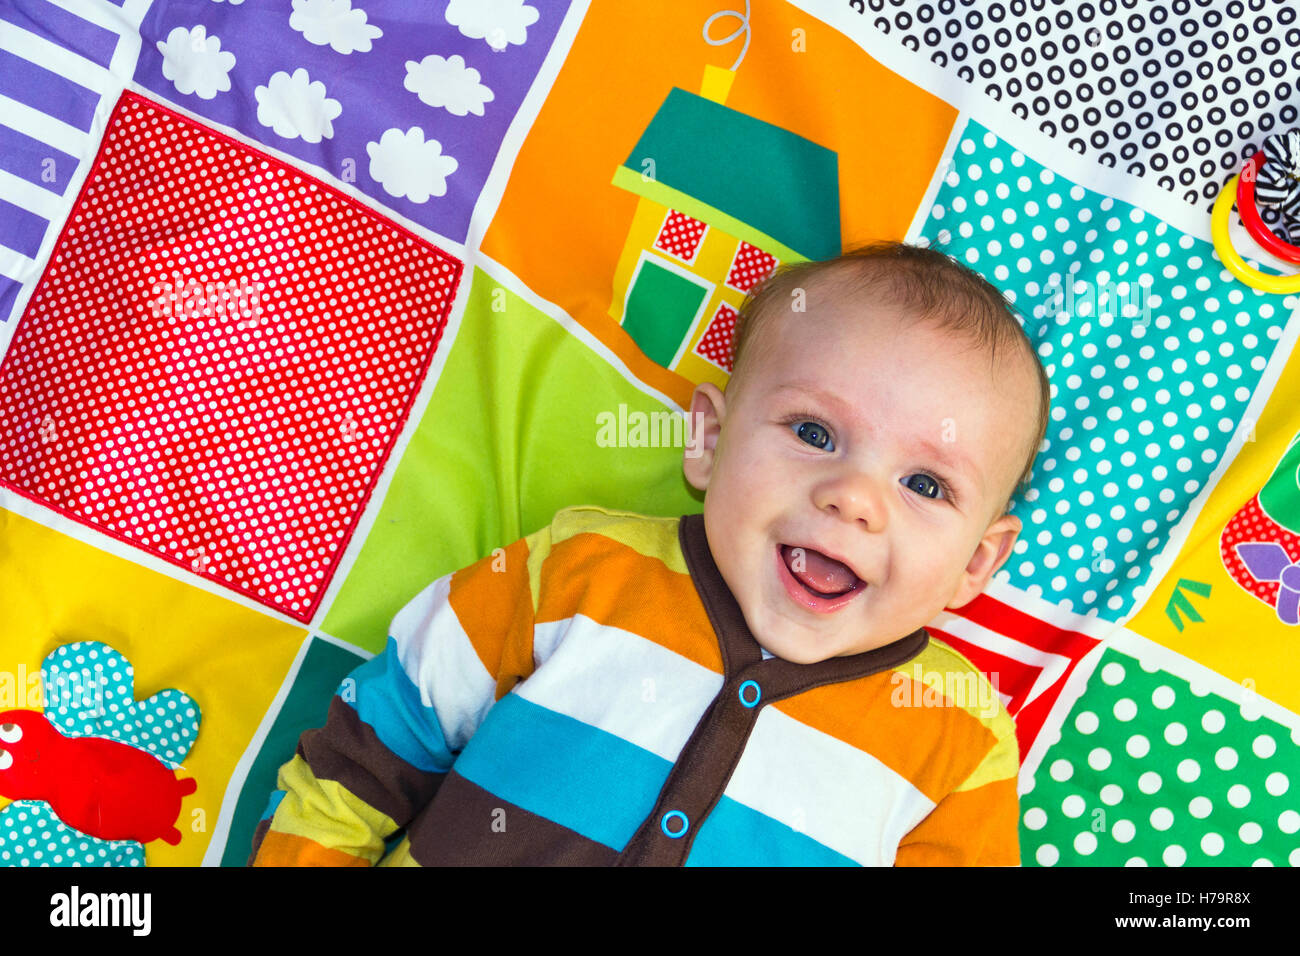 Baby boy playing on a play mat Stock Photo